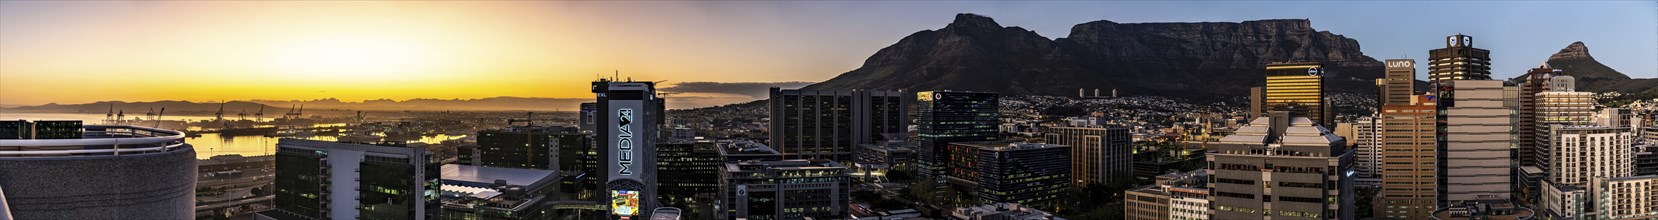 Cape Town, South Africa, at sunrise. View from a skyscraper, Africa